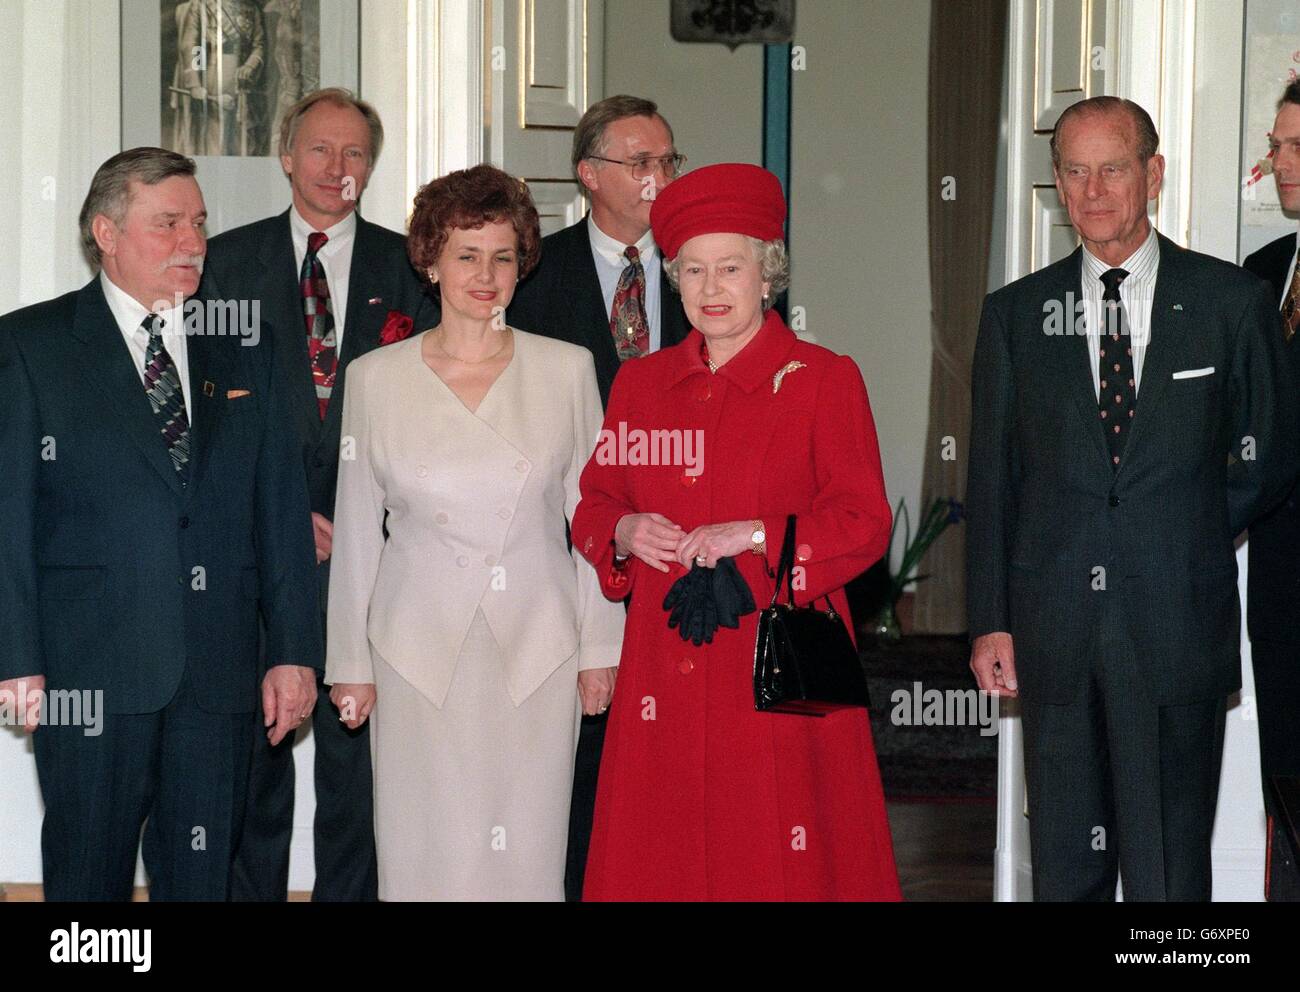 Queen Elizabeth II (r) stands with former Polish President Lech Walesa (l) and his wife Danuta after their meeting in the Belevedere Palace in Warsaw. Stock Photo